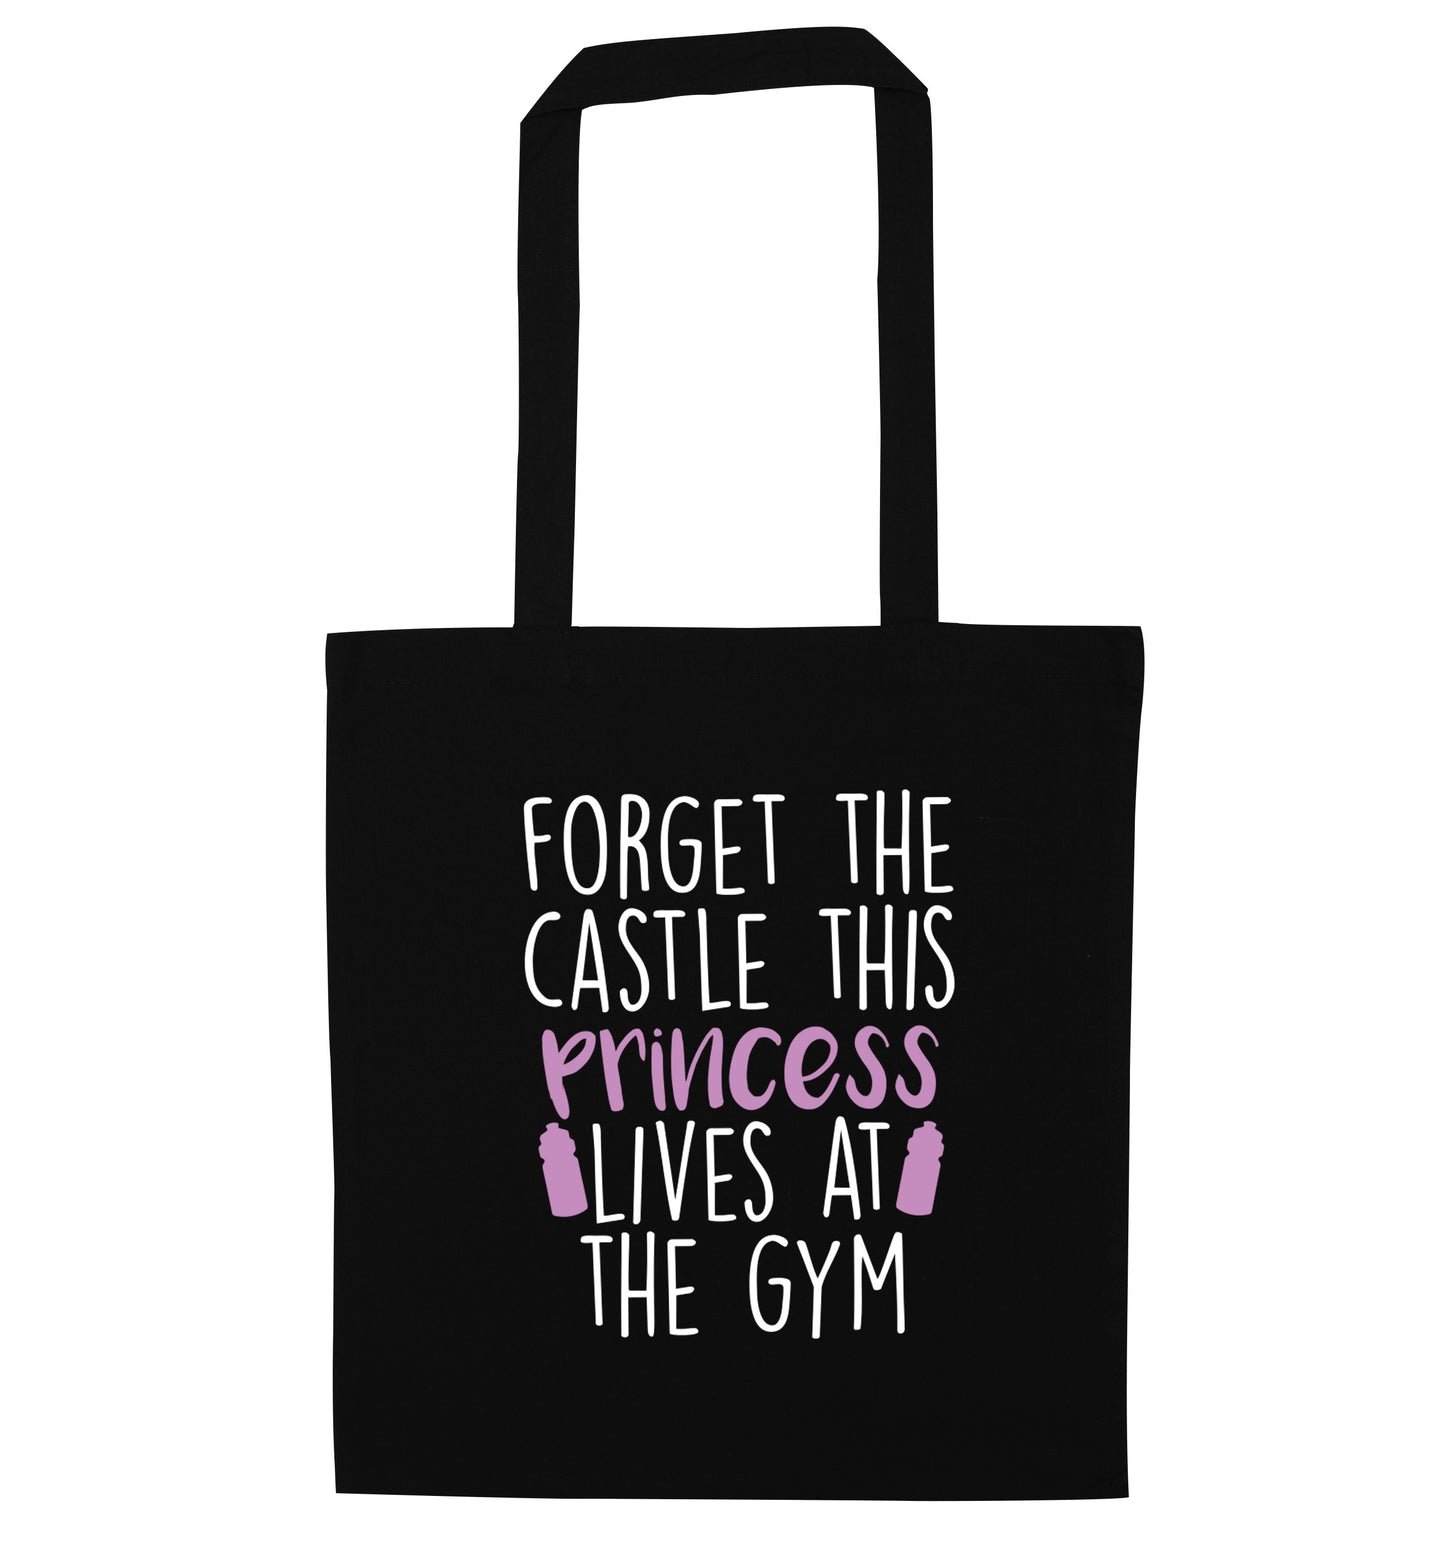 Forget the castle this princess lives at the gym black tote bag